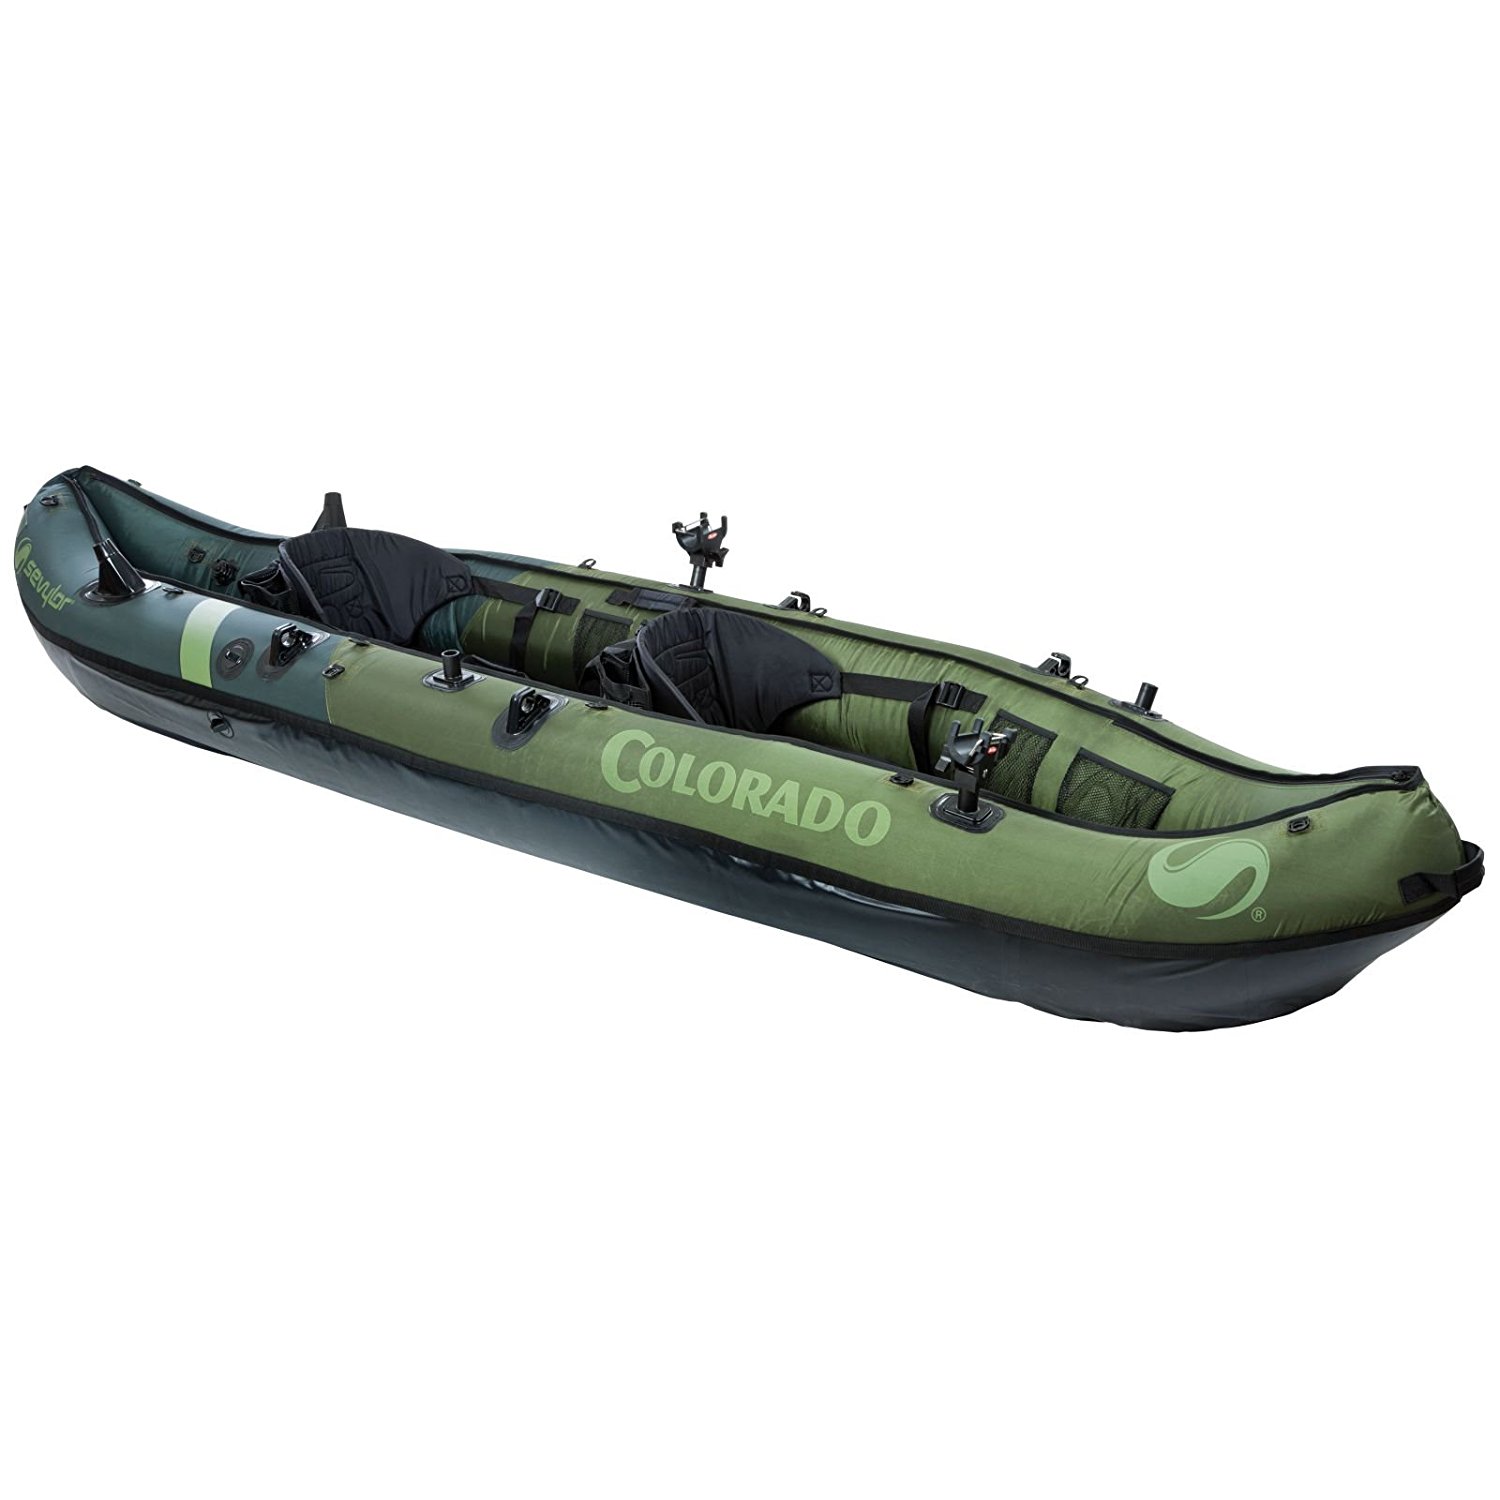 Coleman Colorado inflatable fishing kayak from Sevylor